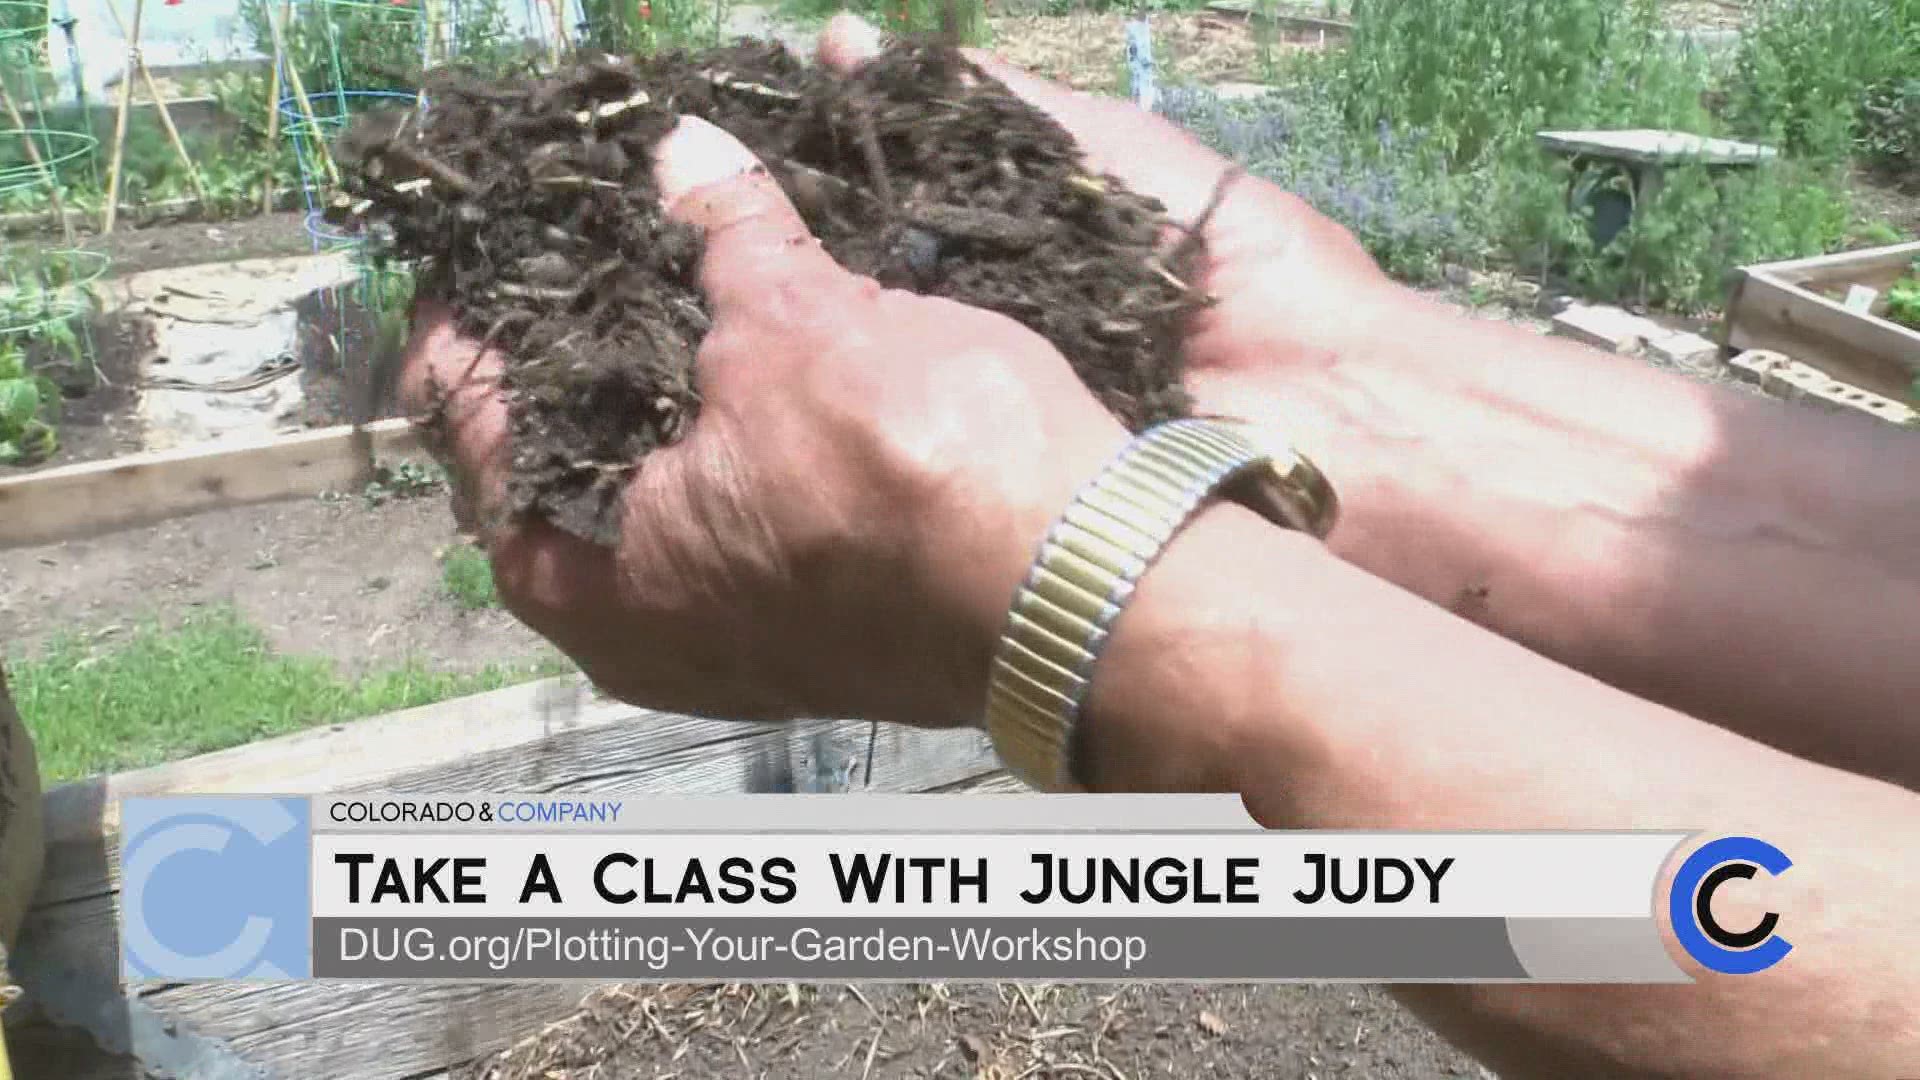 MEET THE COMMUNITY GARDENERS WHO WILL BE OFFERING TIPS AND TRICKS THAT MIGHT HELP YOUR GARDEN THRIVE THIS SUMMER IN THIS NEW SERIES WITH DENVER URBAN GARDENS.